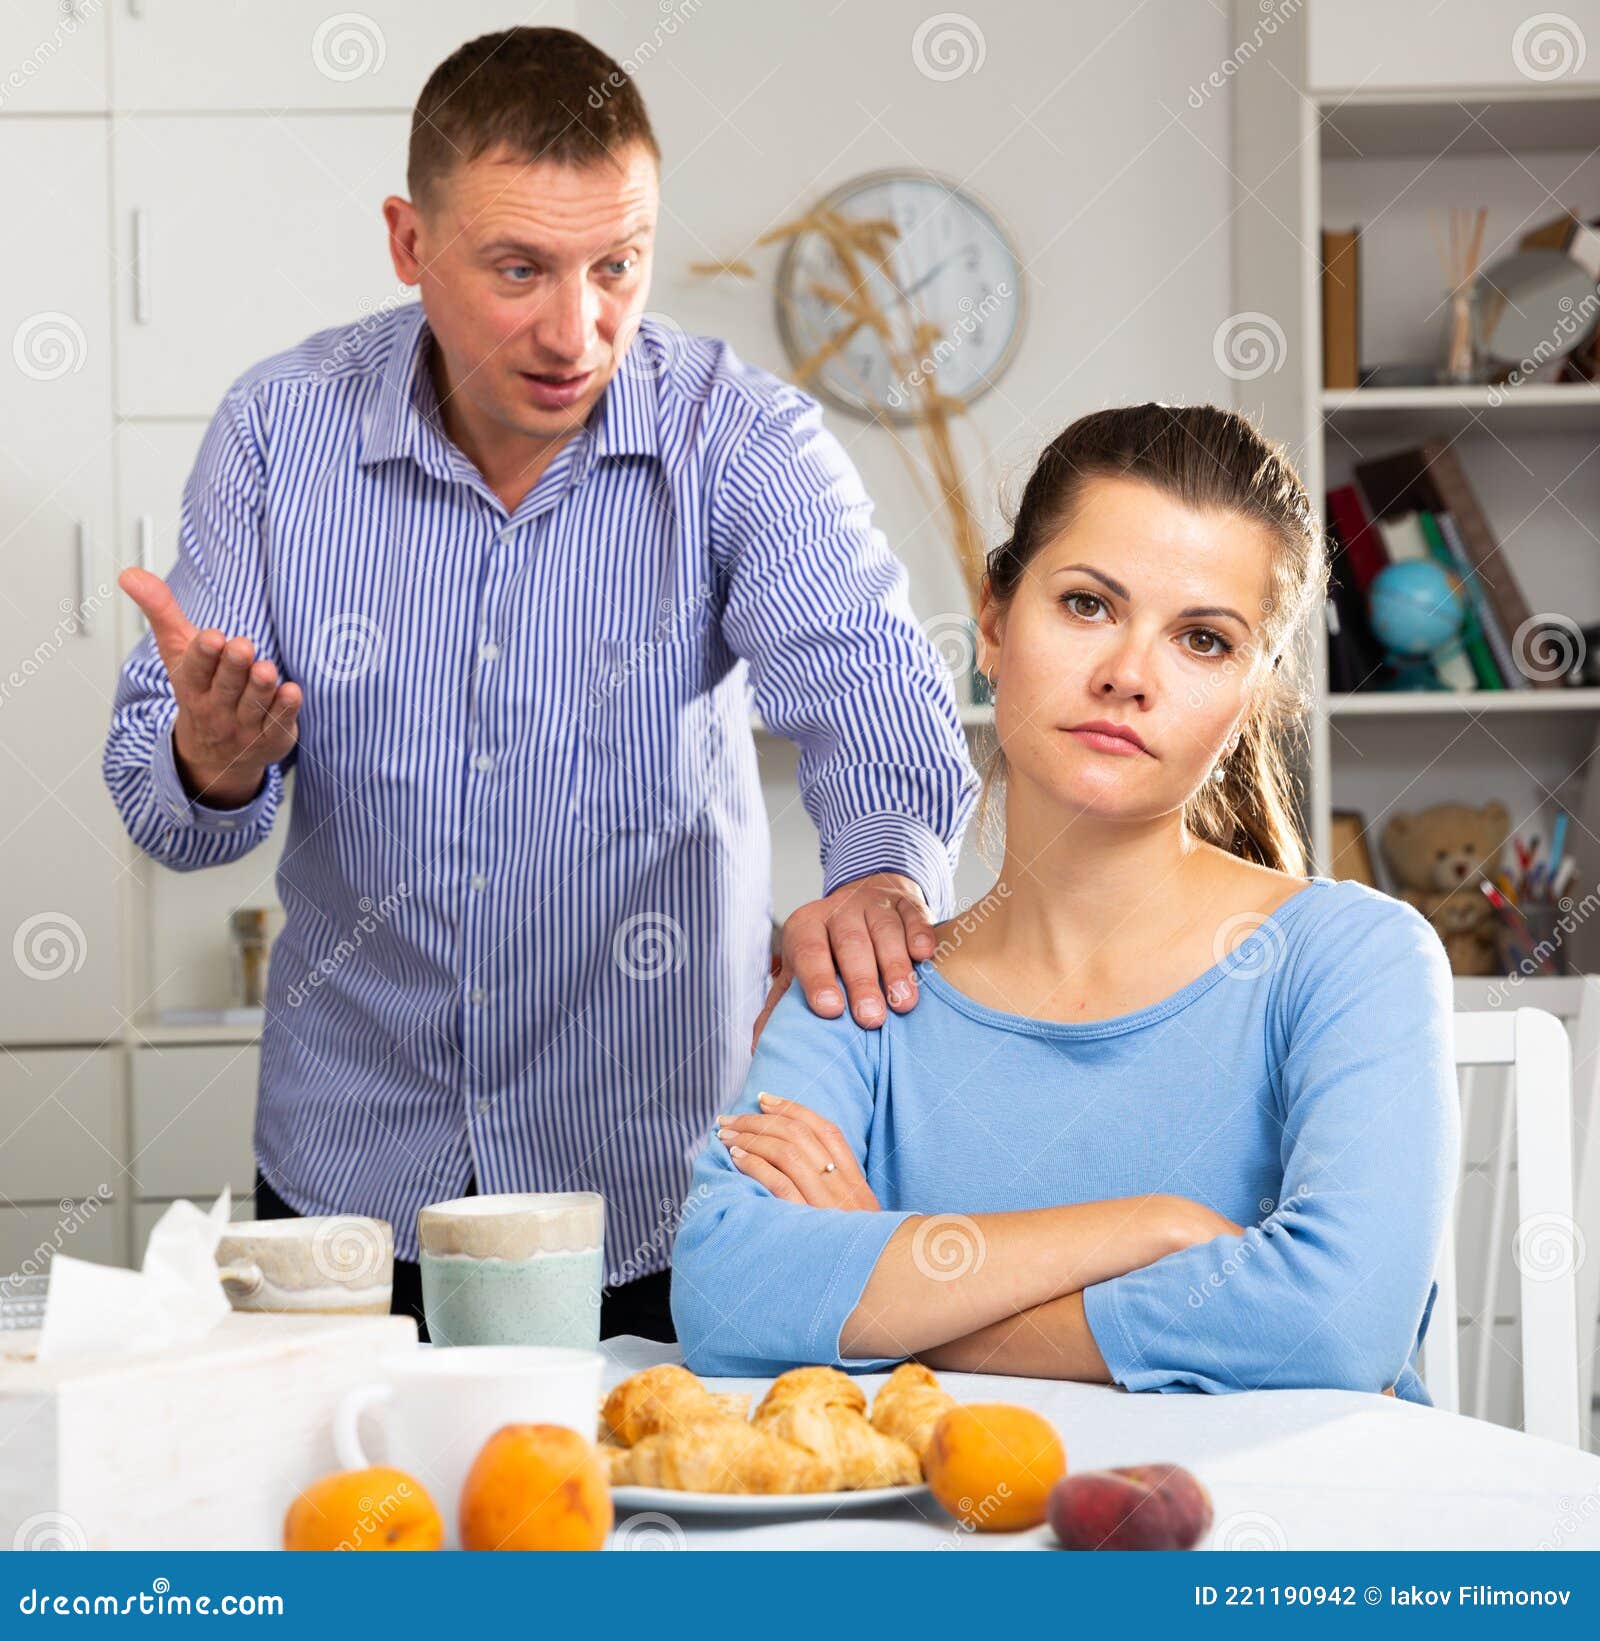 irritated young spouses quarrelling in home kitchen interior